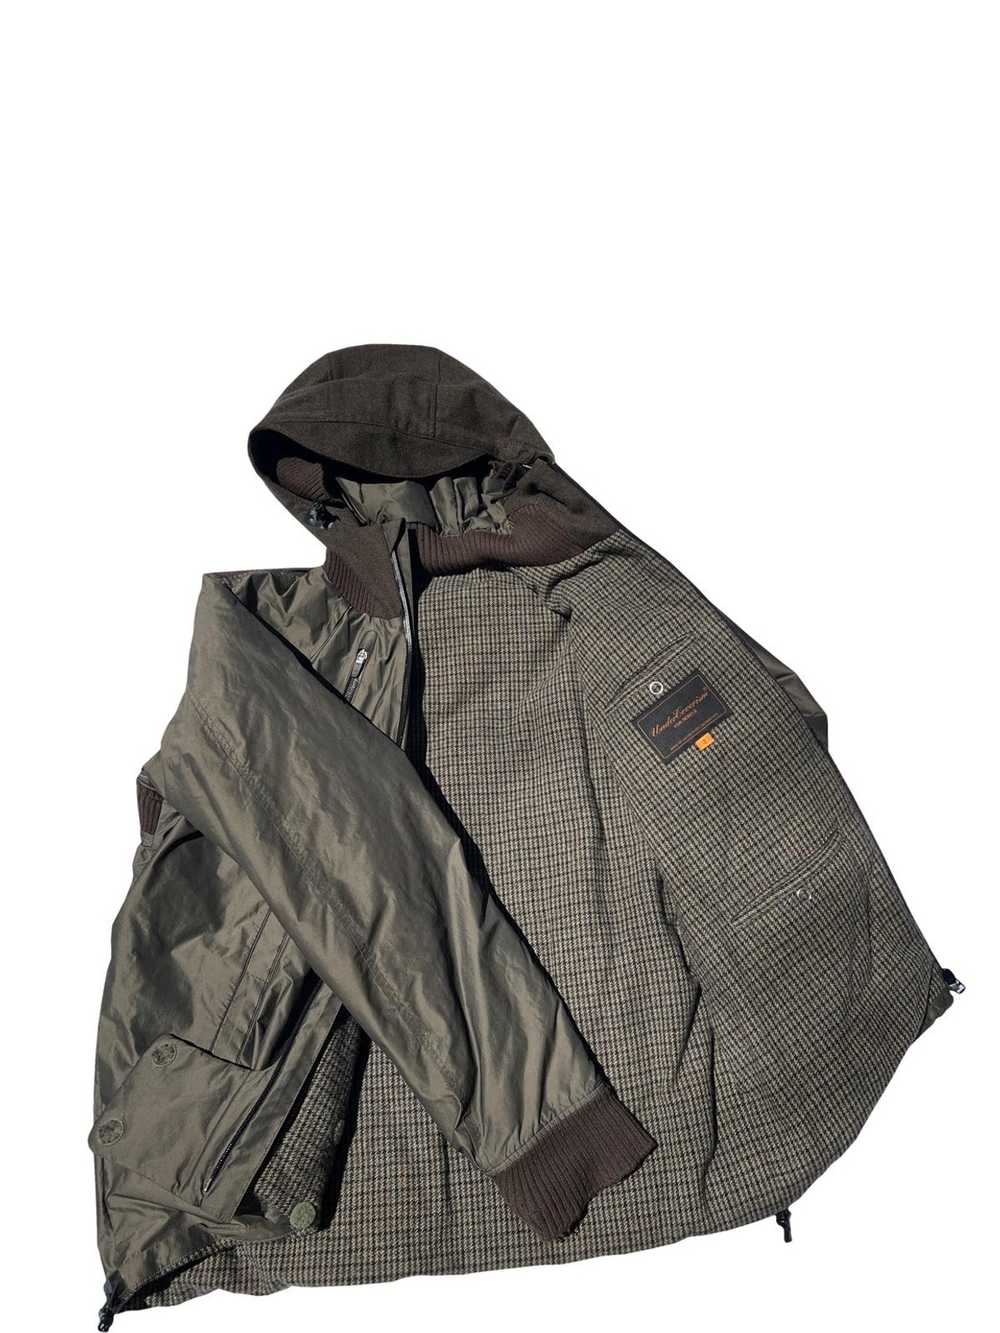 Undercover Undercover Knit Tech/Puffer Jacket 07 - image 4